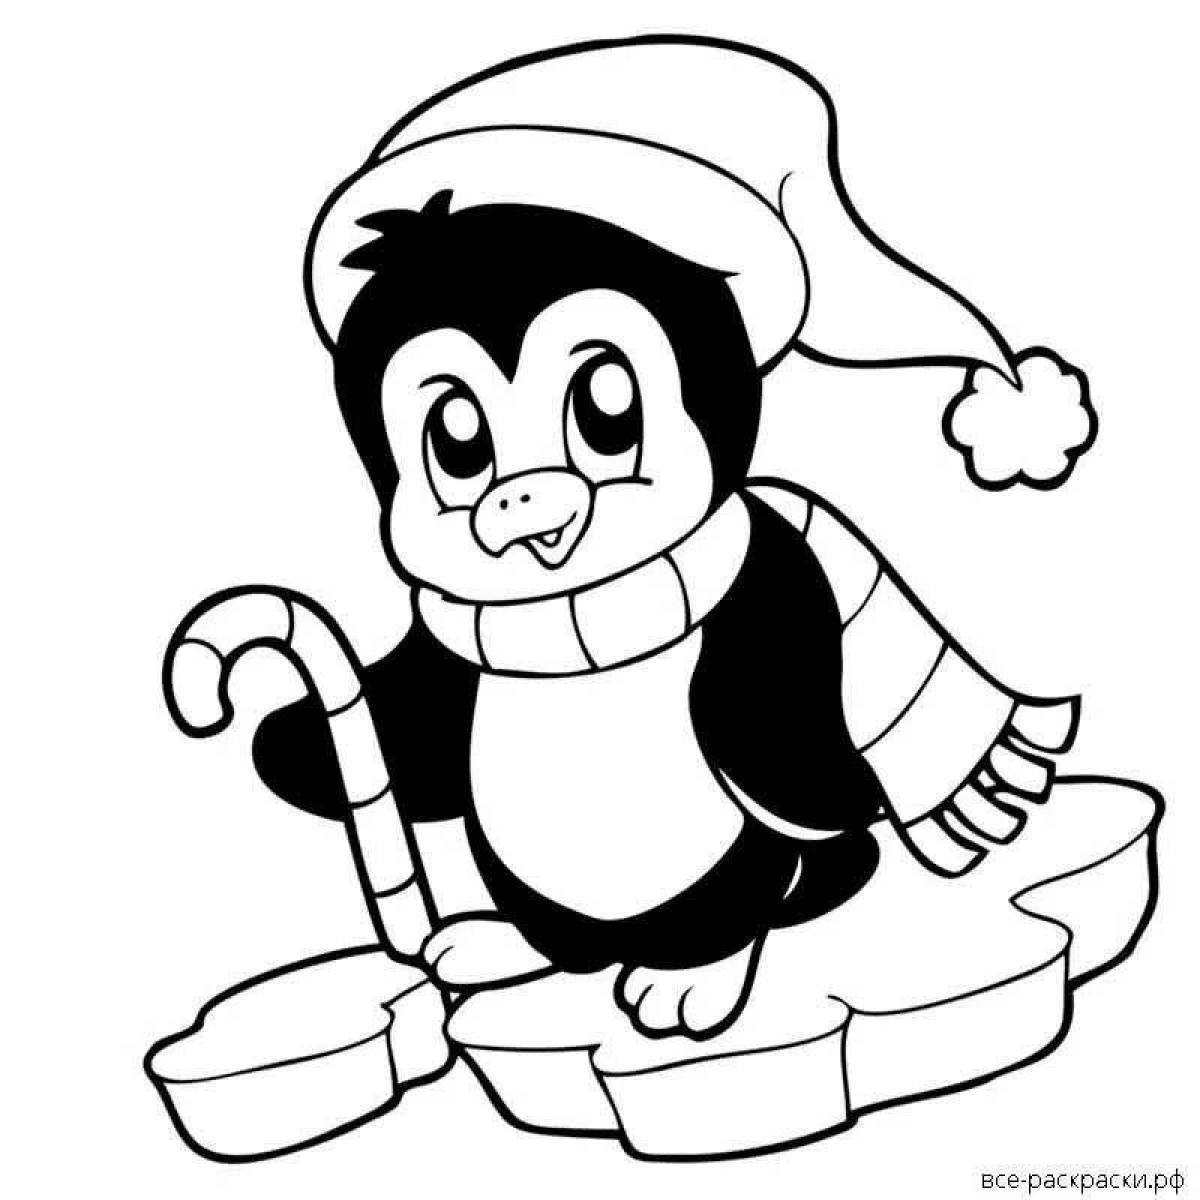 Glittering Christmas penguin coloring page